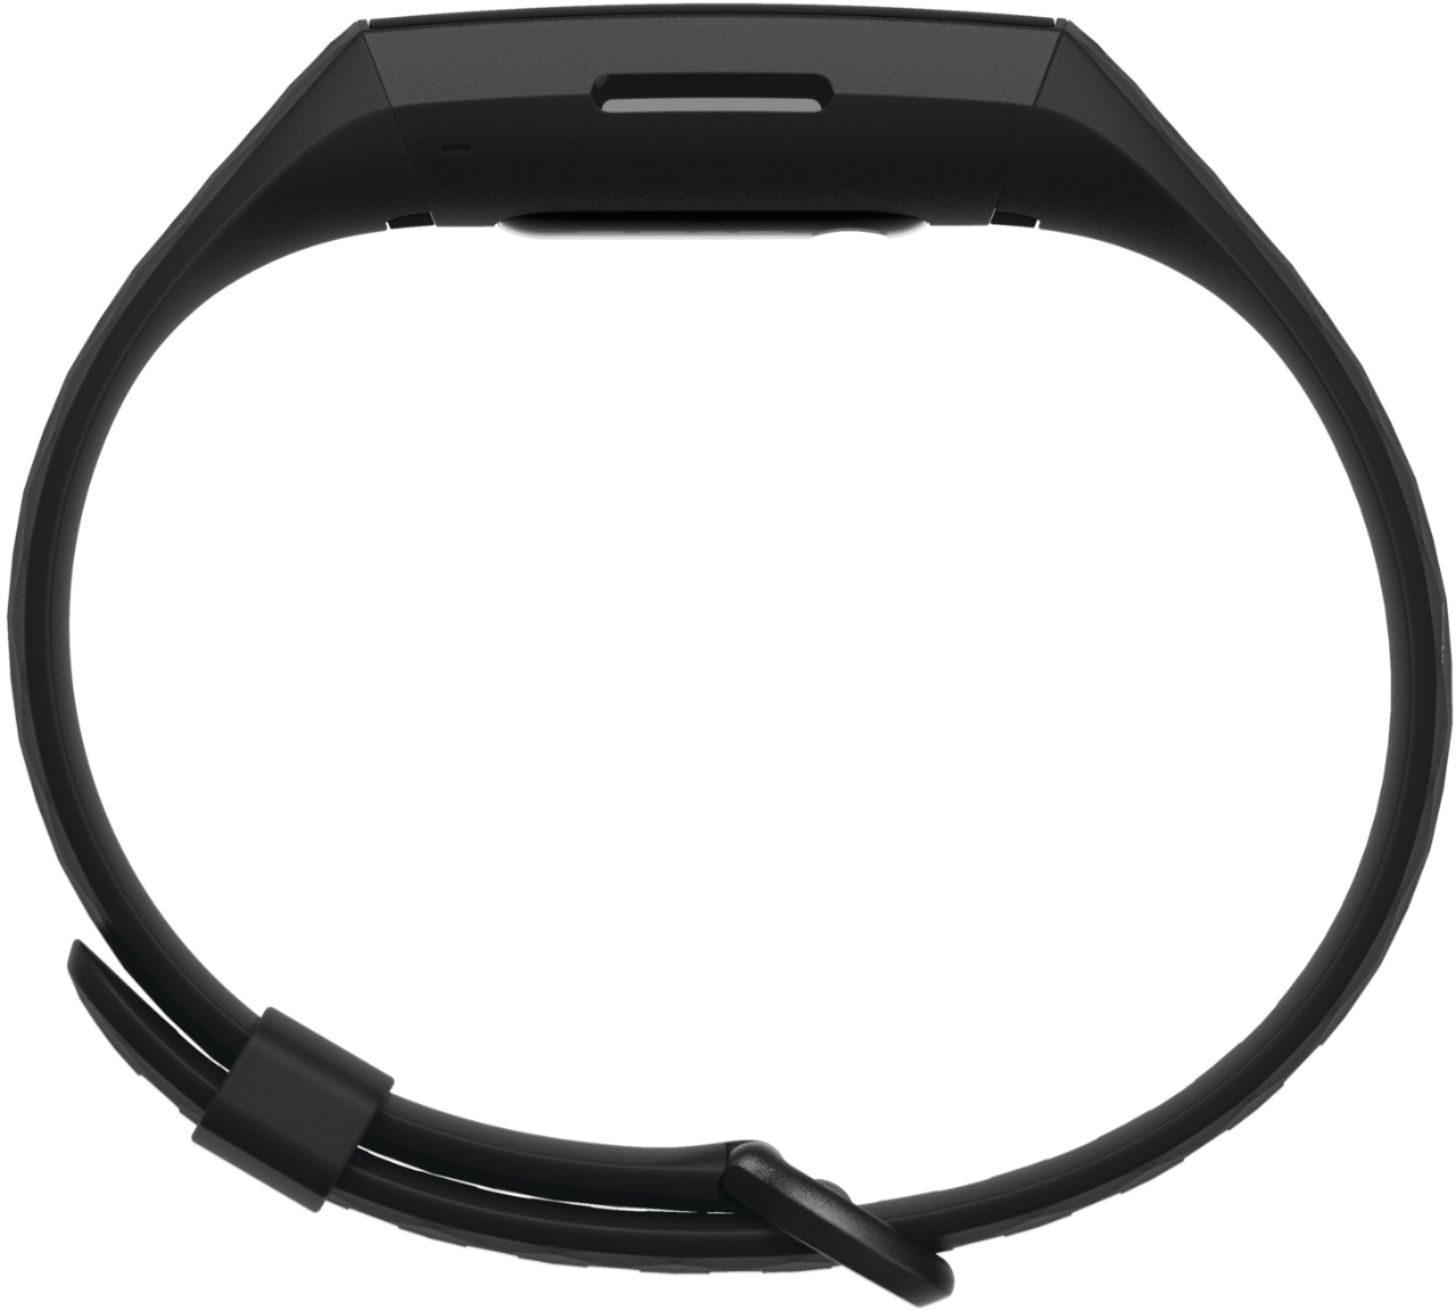 charge 4 fitbit best buy